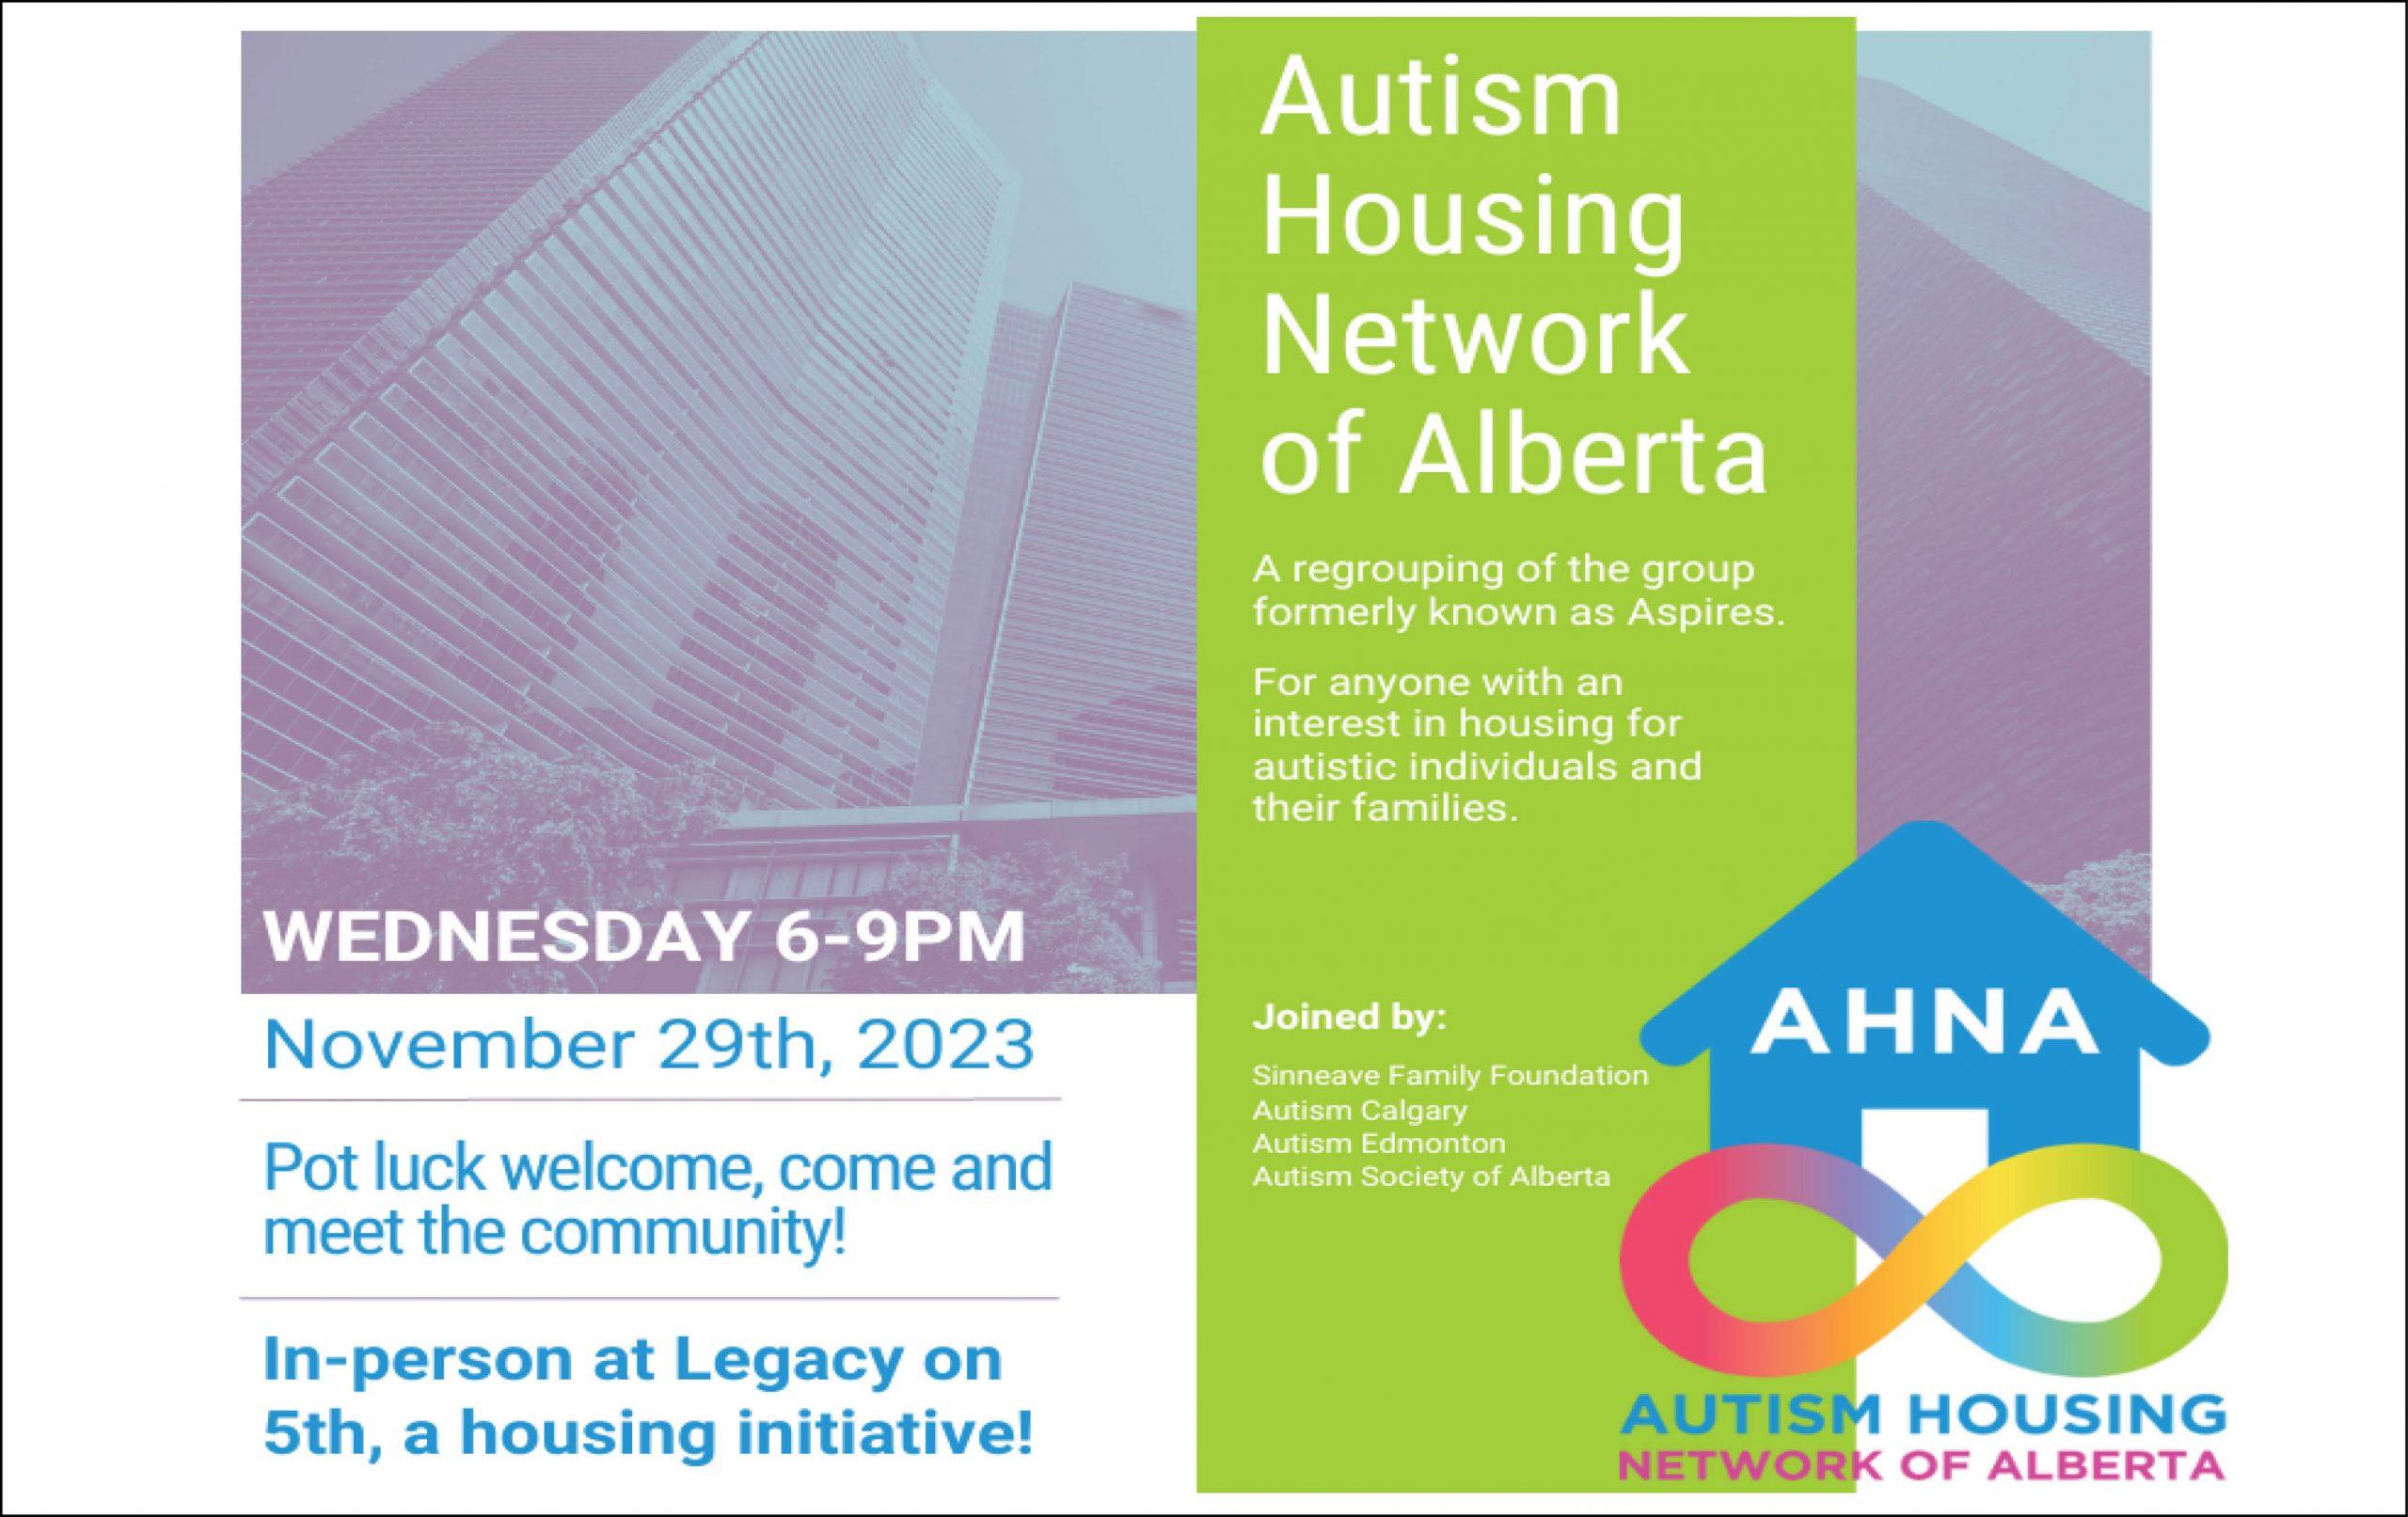 There is a faded photo of some tall, downtown buildings. A vertical green banner is on the right side, together with the Alberta Housing Network logo (a blue house on a rainbow infinity symbol) The text invites people to the Nov. meeting and potluck. Wed Nov 29 6-9 p.m.